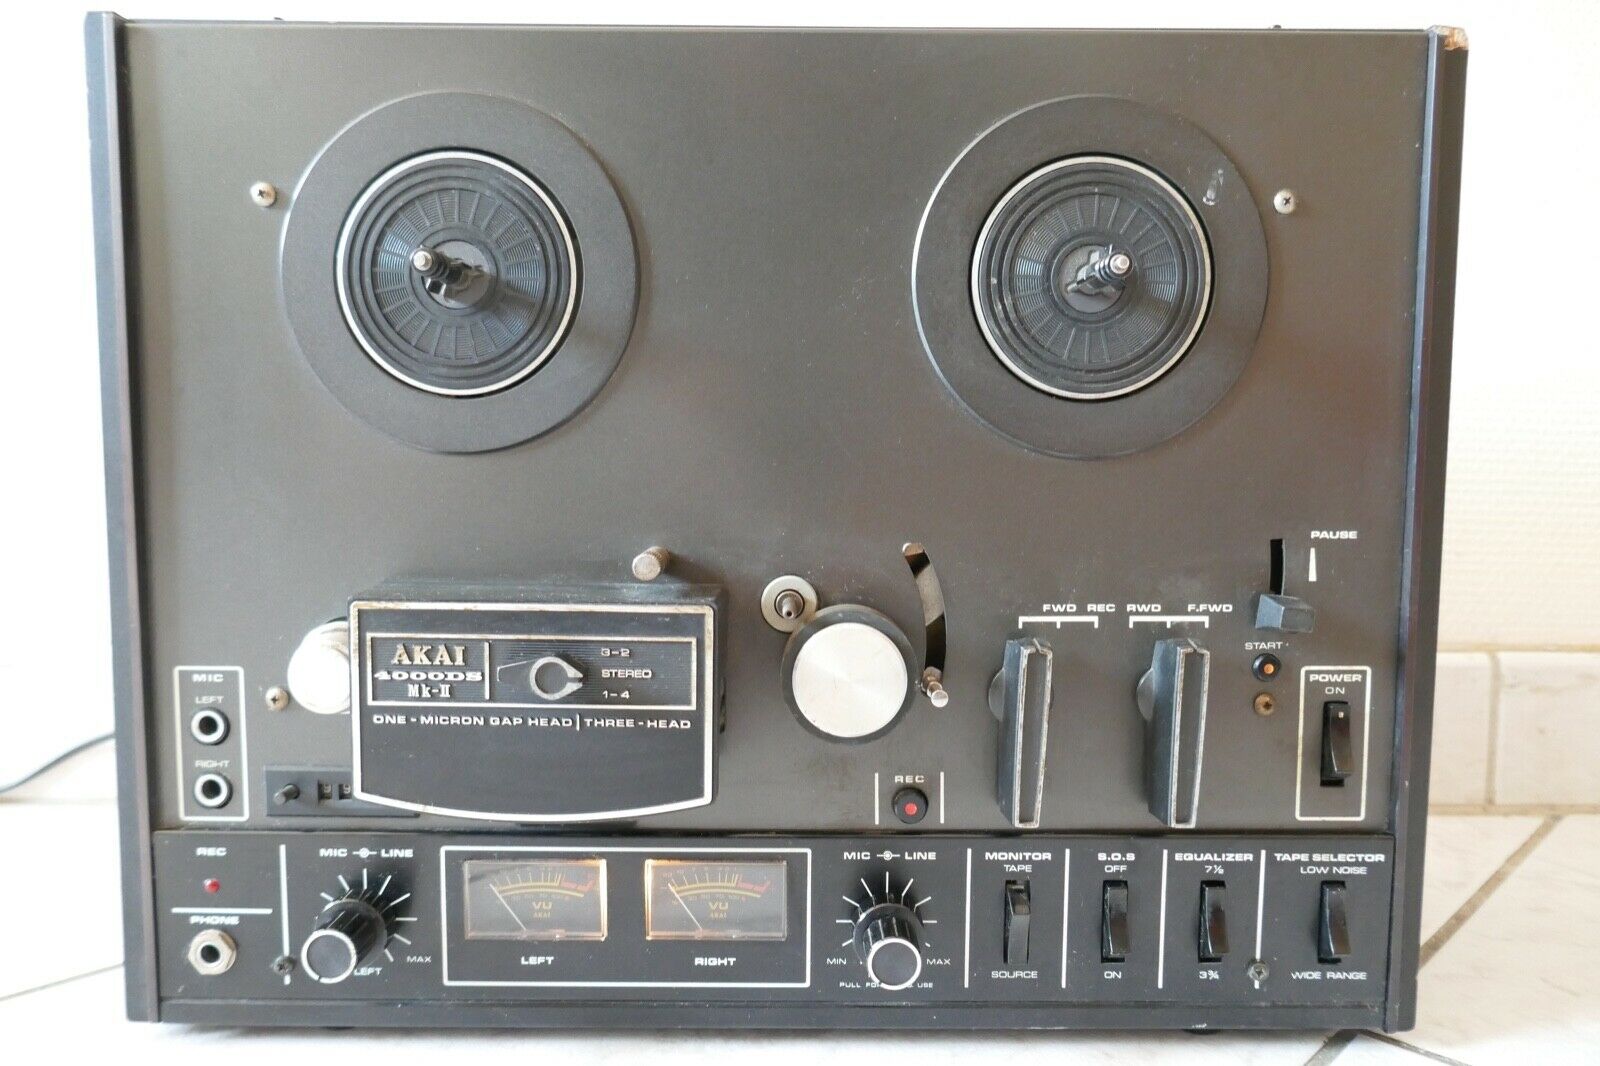 tape recorder magnétophone bande akai 4000DS MK-II vintage occasion